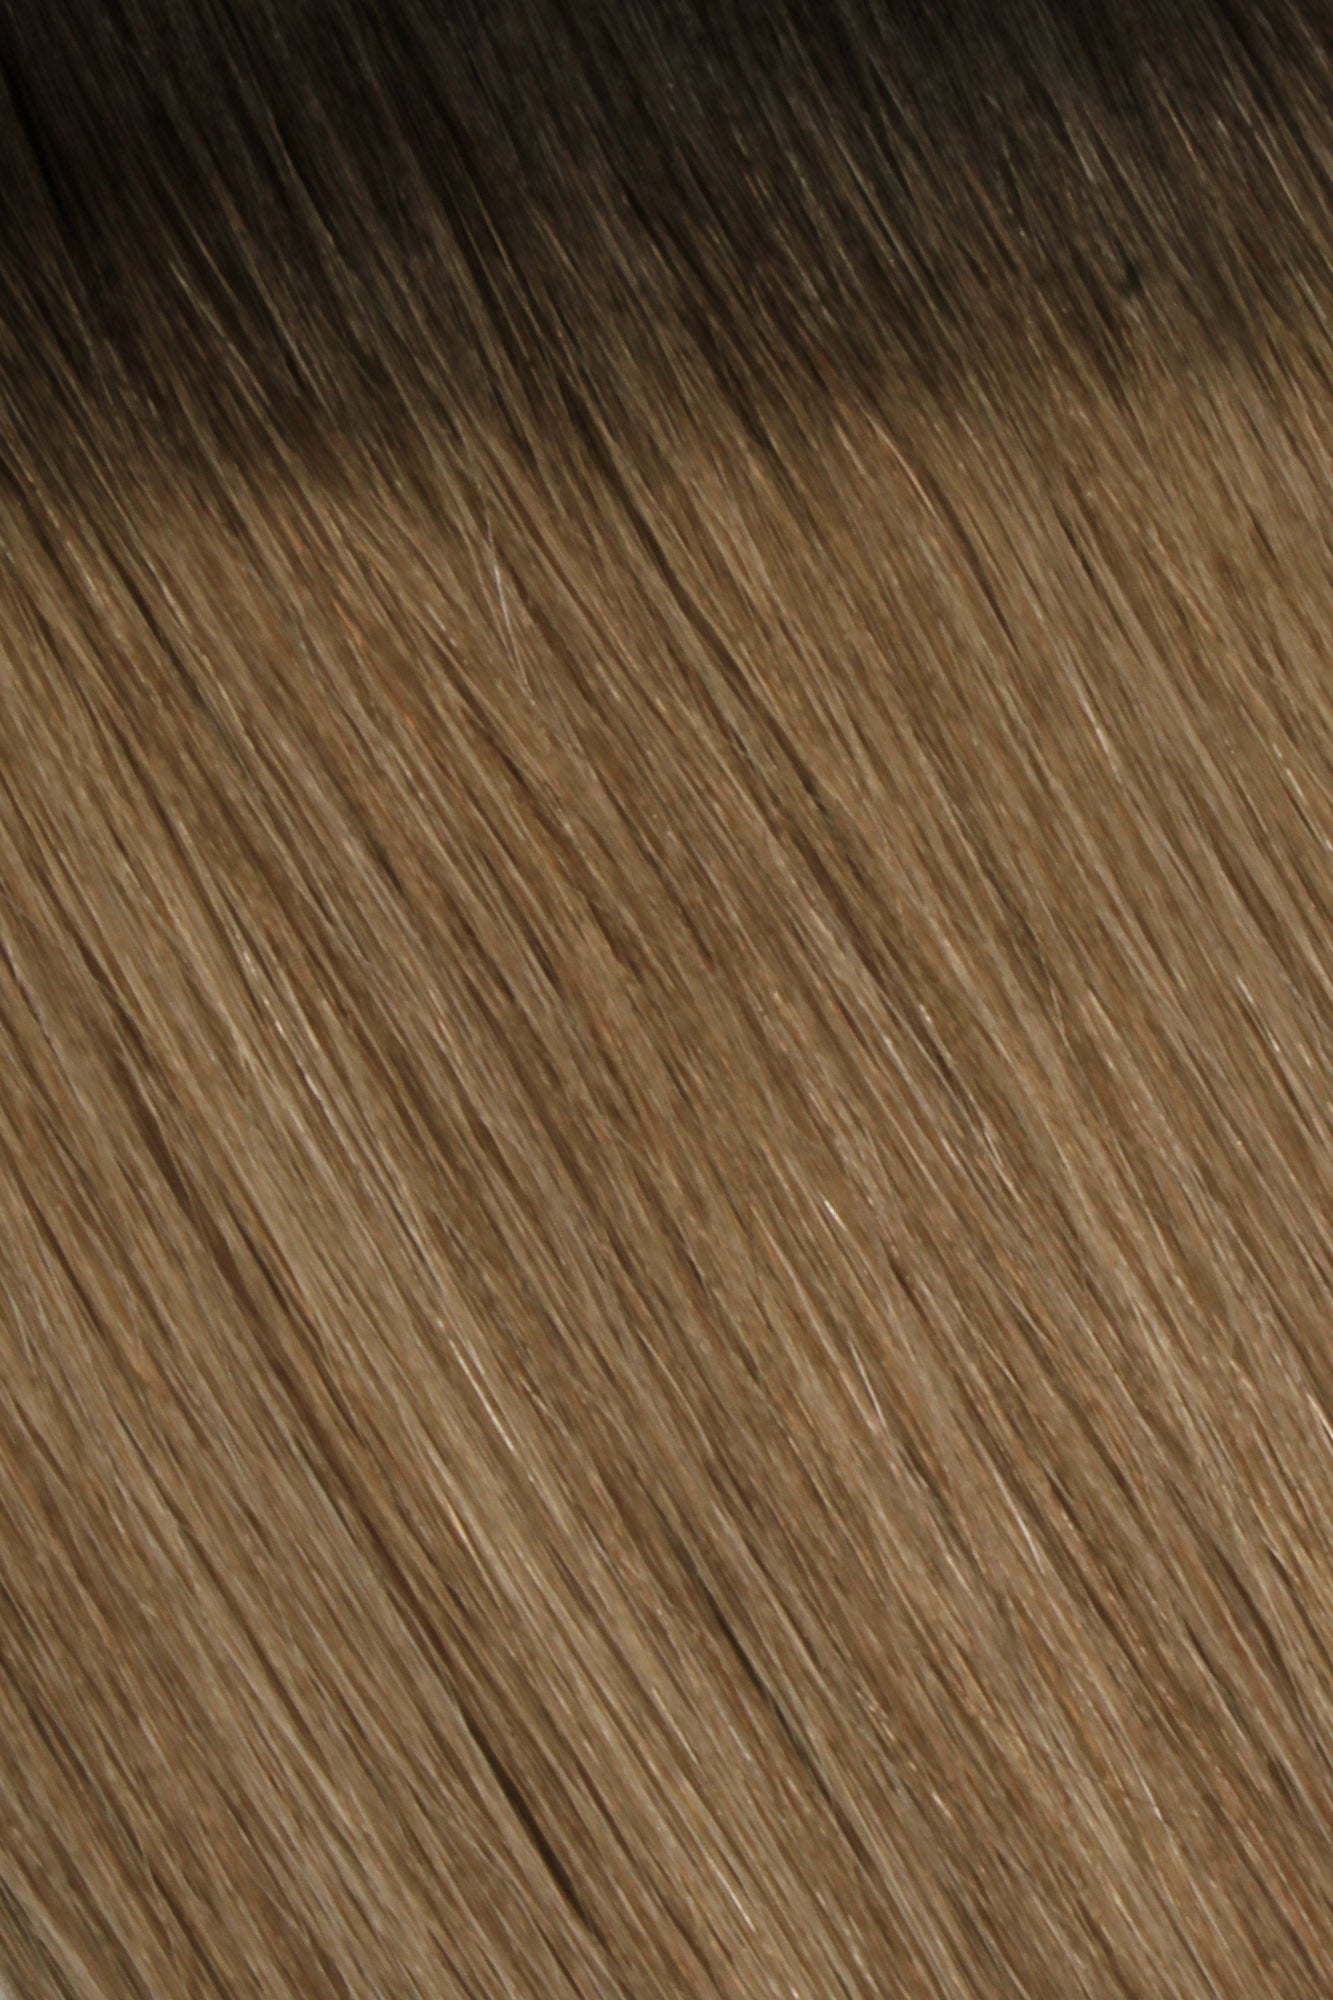 Nano Bonds 22 Inches - SWAY Hair Extensions Mochaccino-Melt-R2-6-24 Ultra-fine, invisible bonds for a flawless, natural look. 100% Remy Human hair, lightweight and versatile. Reusable and perfect for individual or salon use.